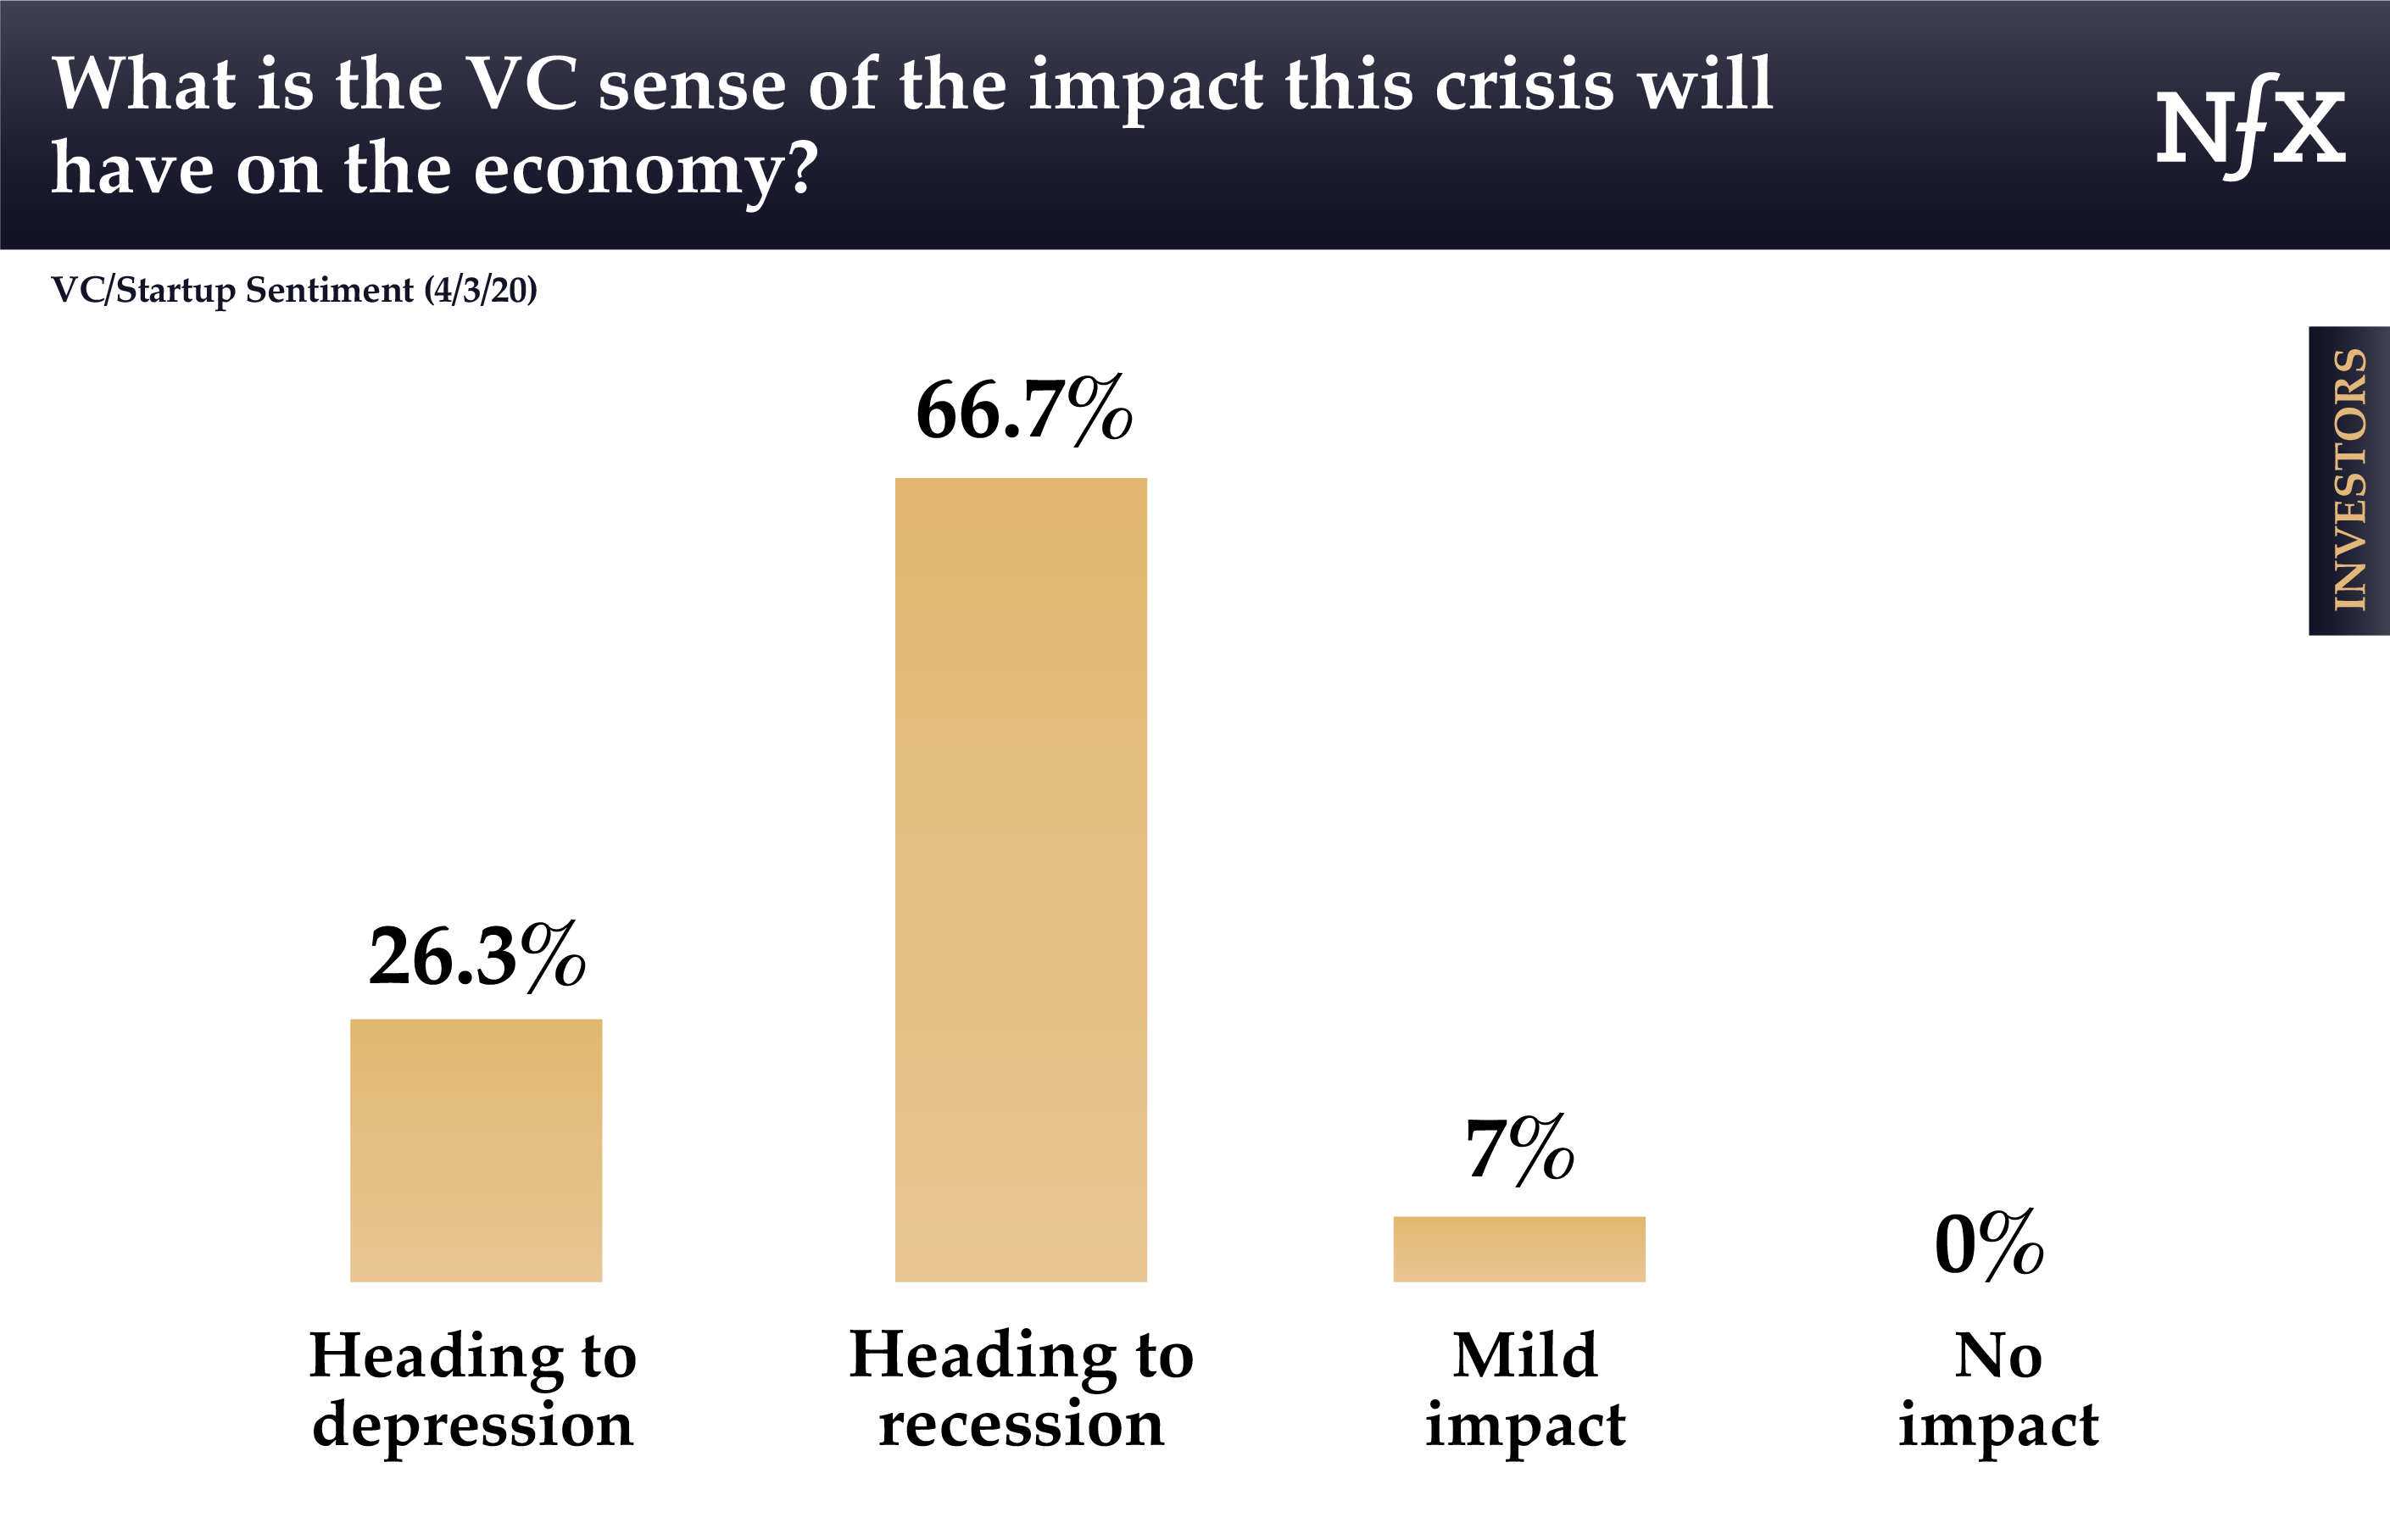 What is the VC sense of the impact this crisis will have on the economy?